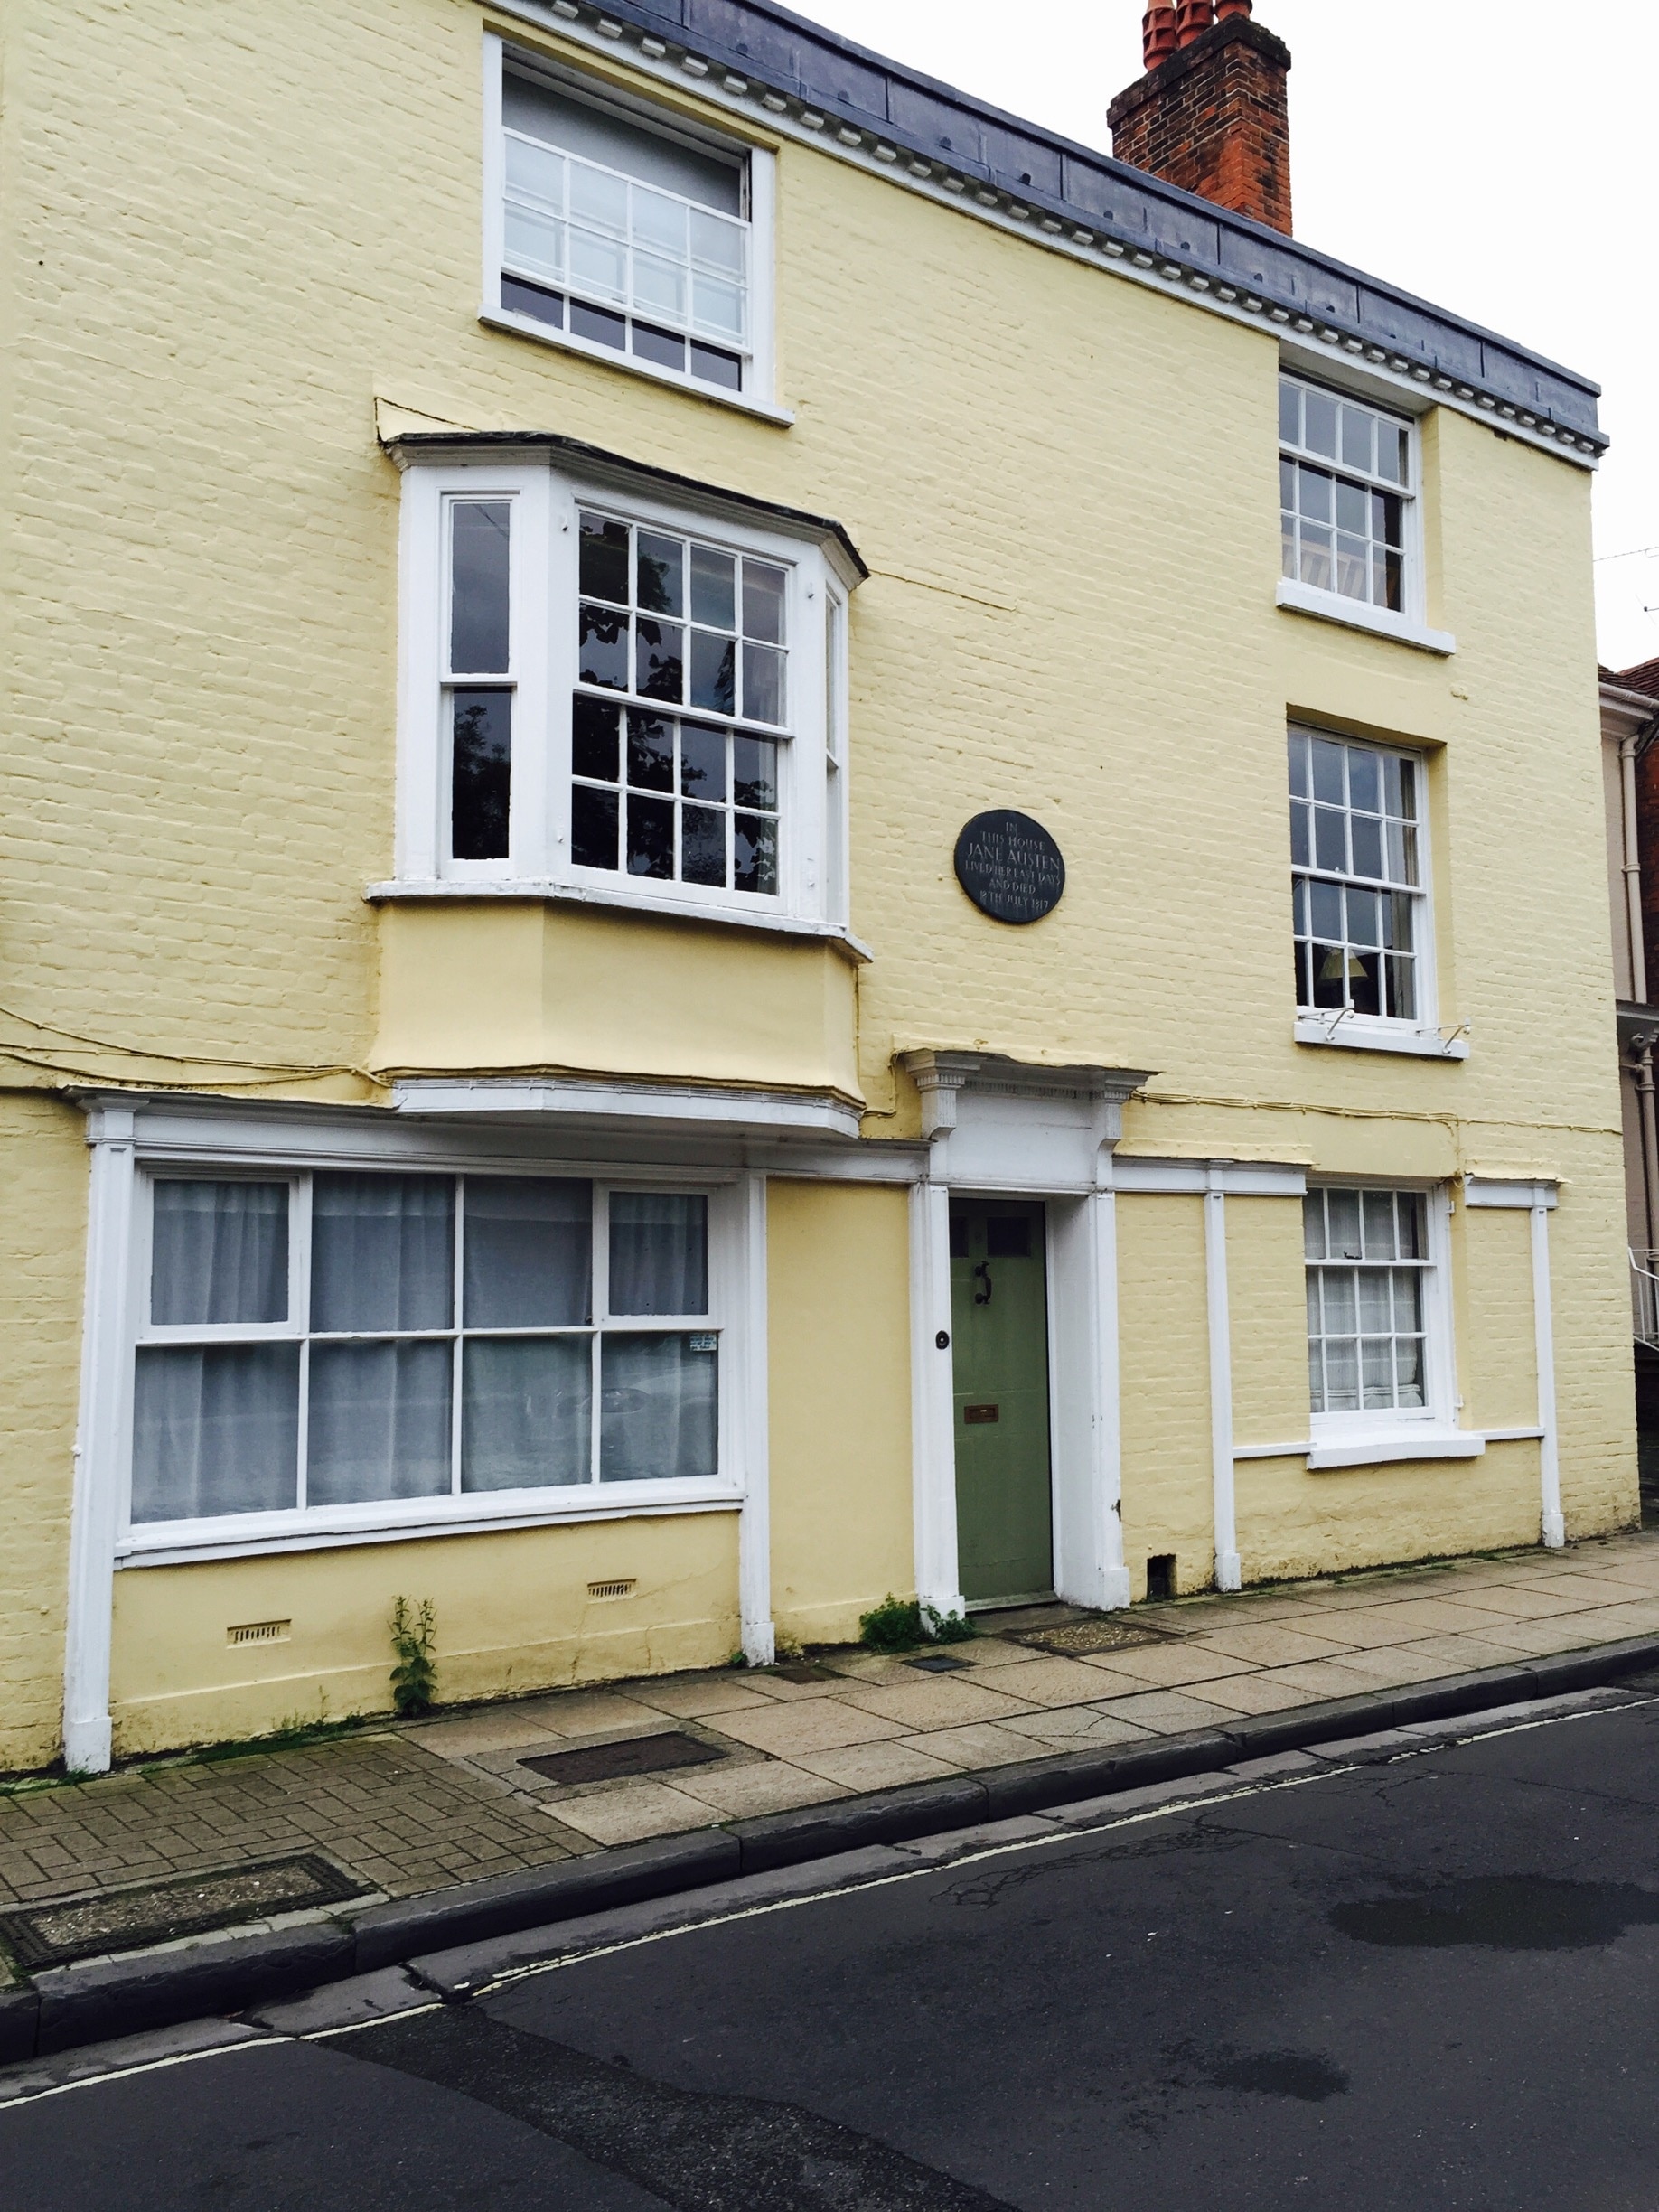 The last home of the great novelist Jane Austen. Now a private residence near the Cathedral